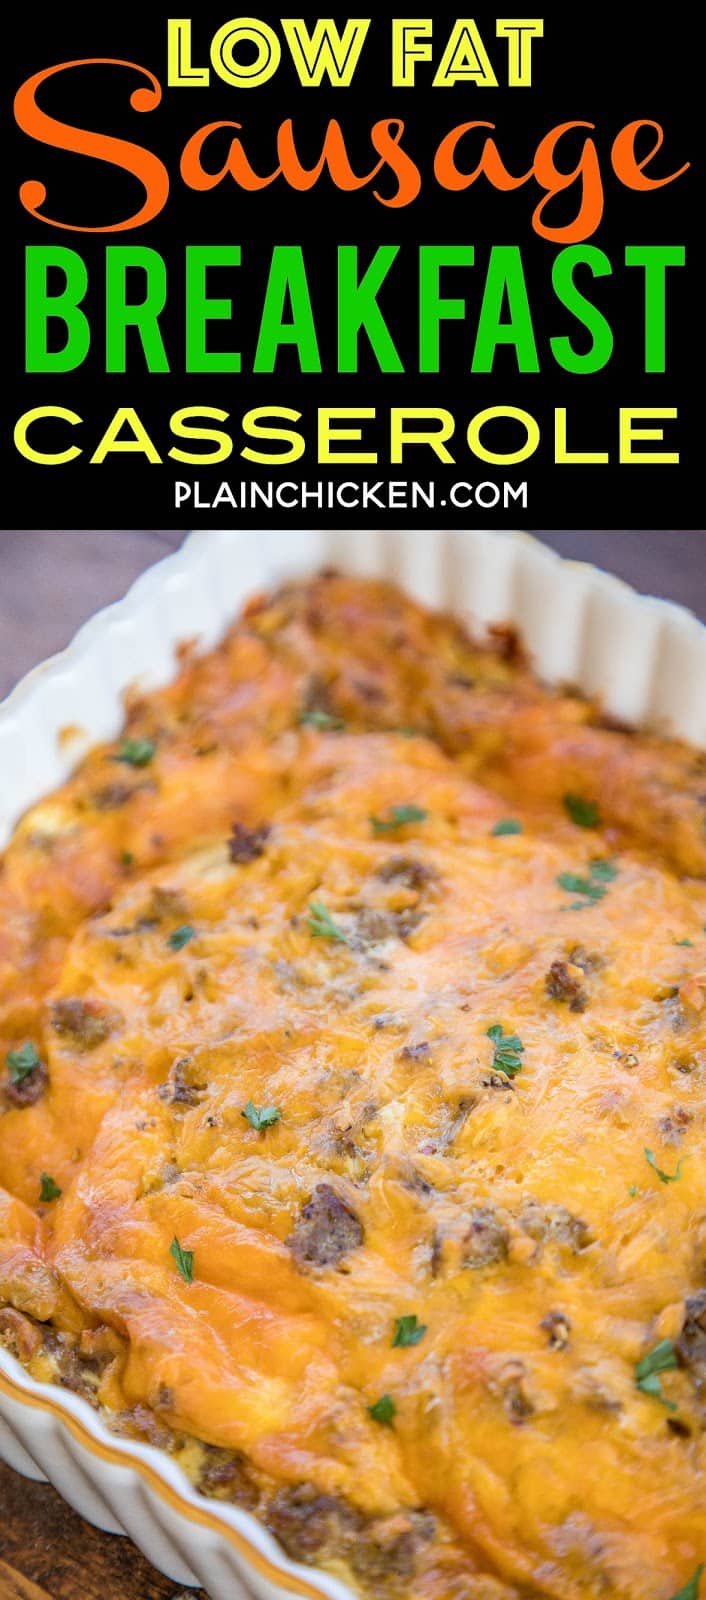 Low Fat Sausage Breakfast Casserole - nobody will ever know this is low-fat! Tastes AMAZING!!! Great make ahead breakfast casserole. Turkey sausage, low-fat cheese, egg beaters, egg, milk and wheat bread. Easy swaps that lower the fat but keep all the flavor. SO good!! #lowfat #breakfast #casserole